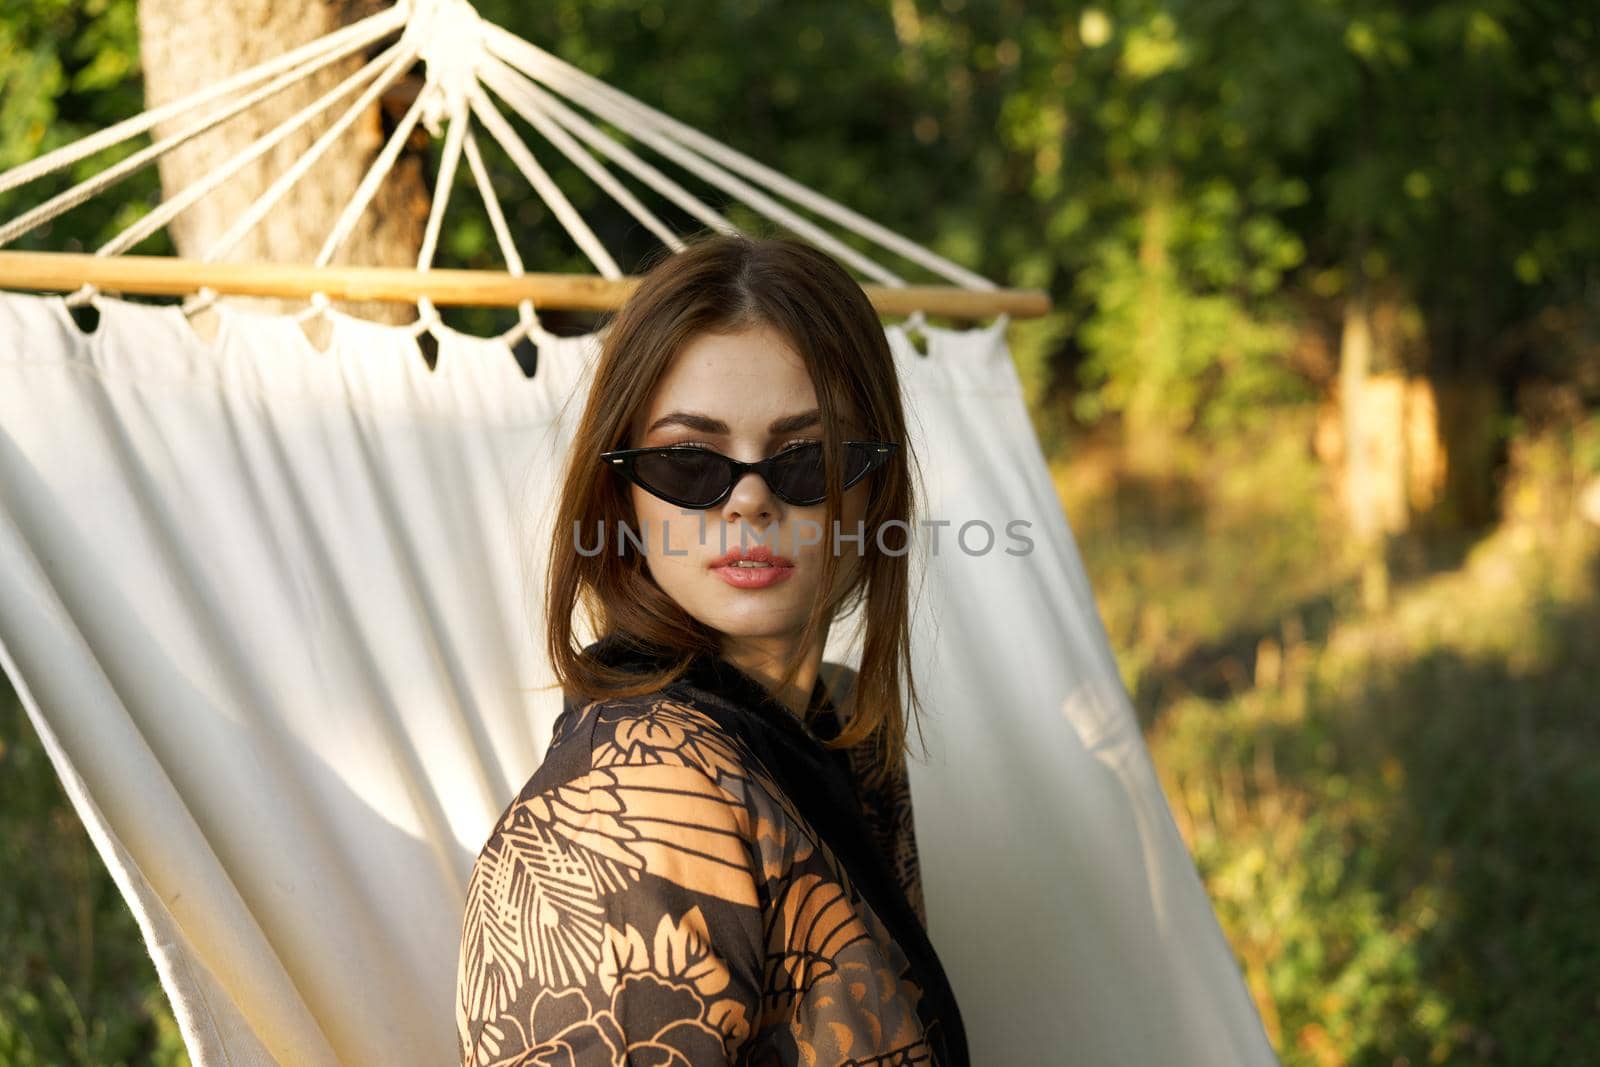 woman in sunglasses lies in a hammock outdoors summer lifestyle. High quality photo